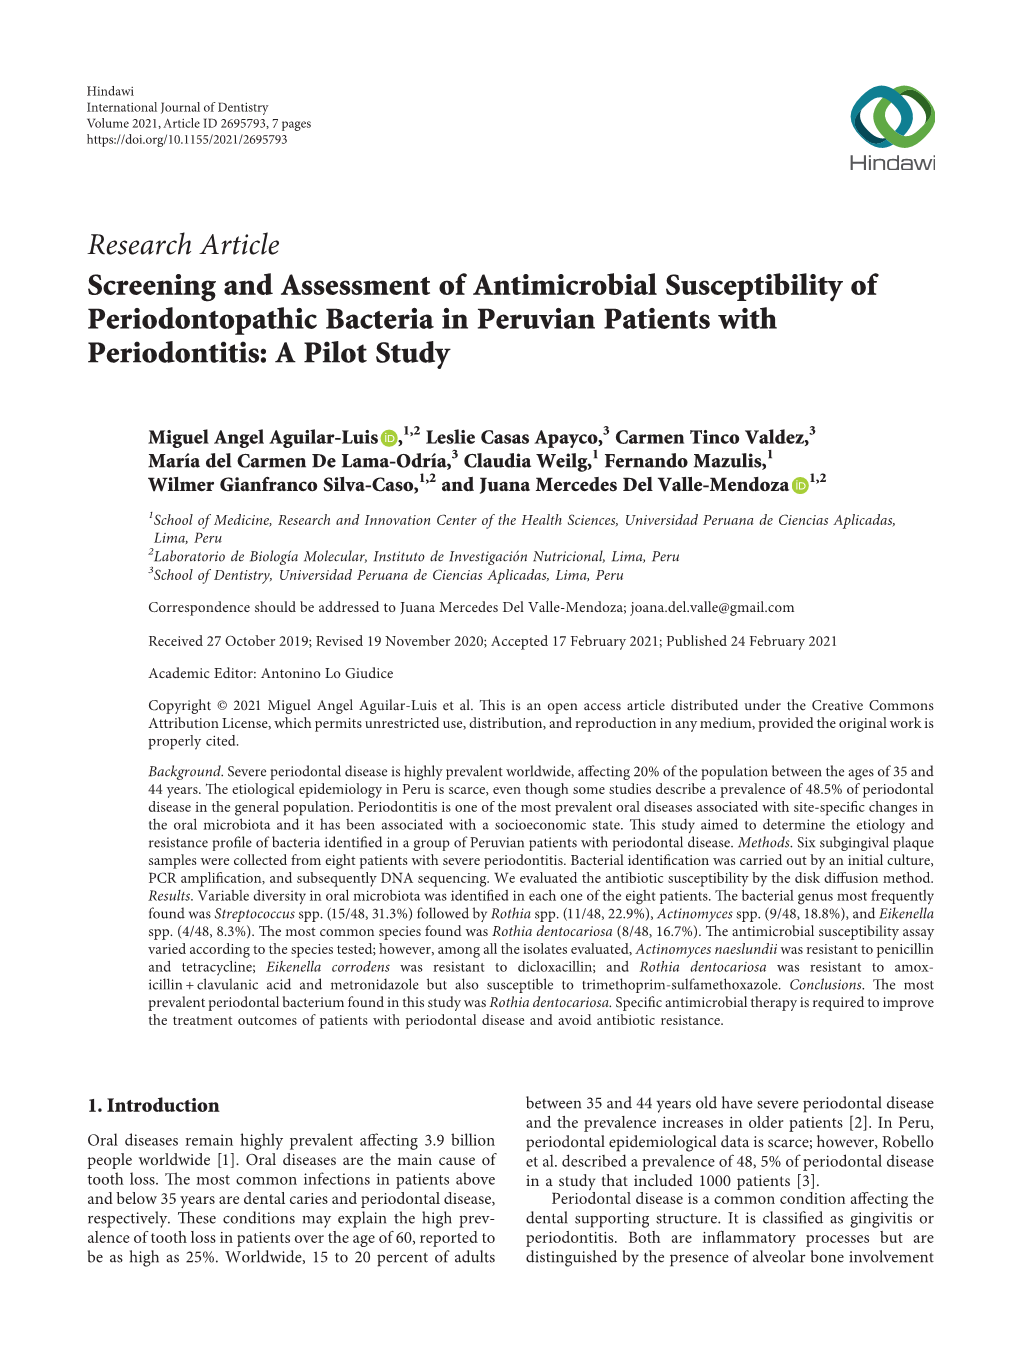 Screening and Assessment of Antimicrobial Susceptibility of Periodontopathic Bacteria in Peruvian Patients with Periodontitis: a Pilot Study